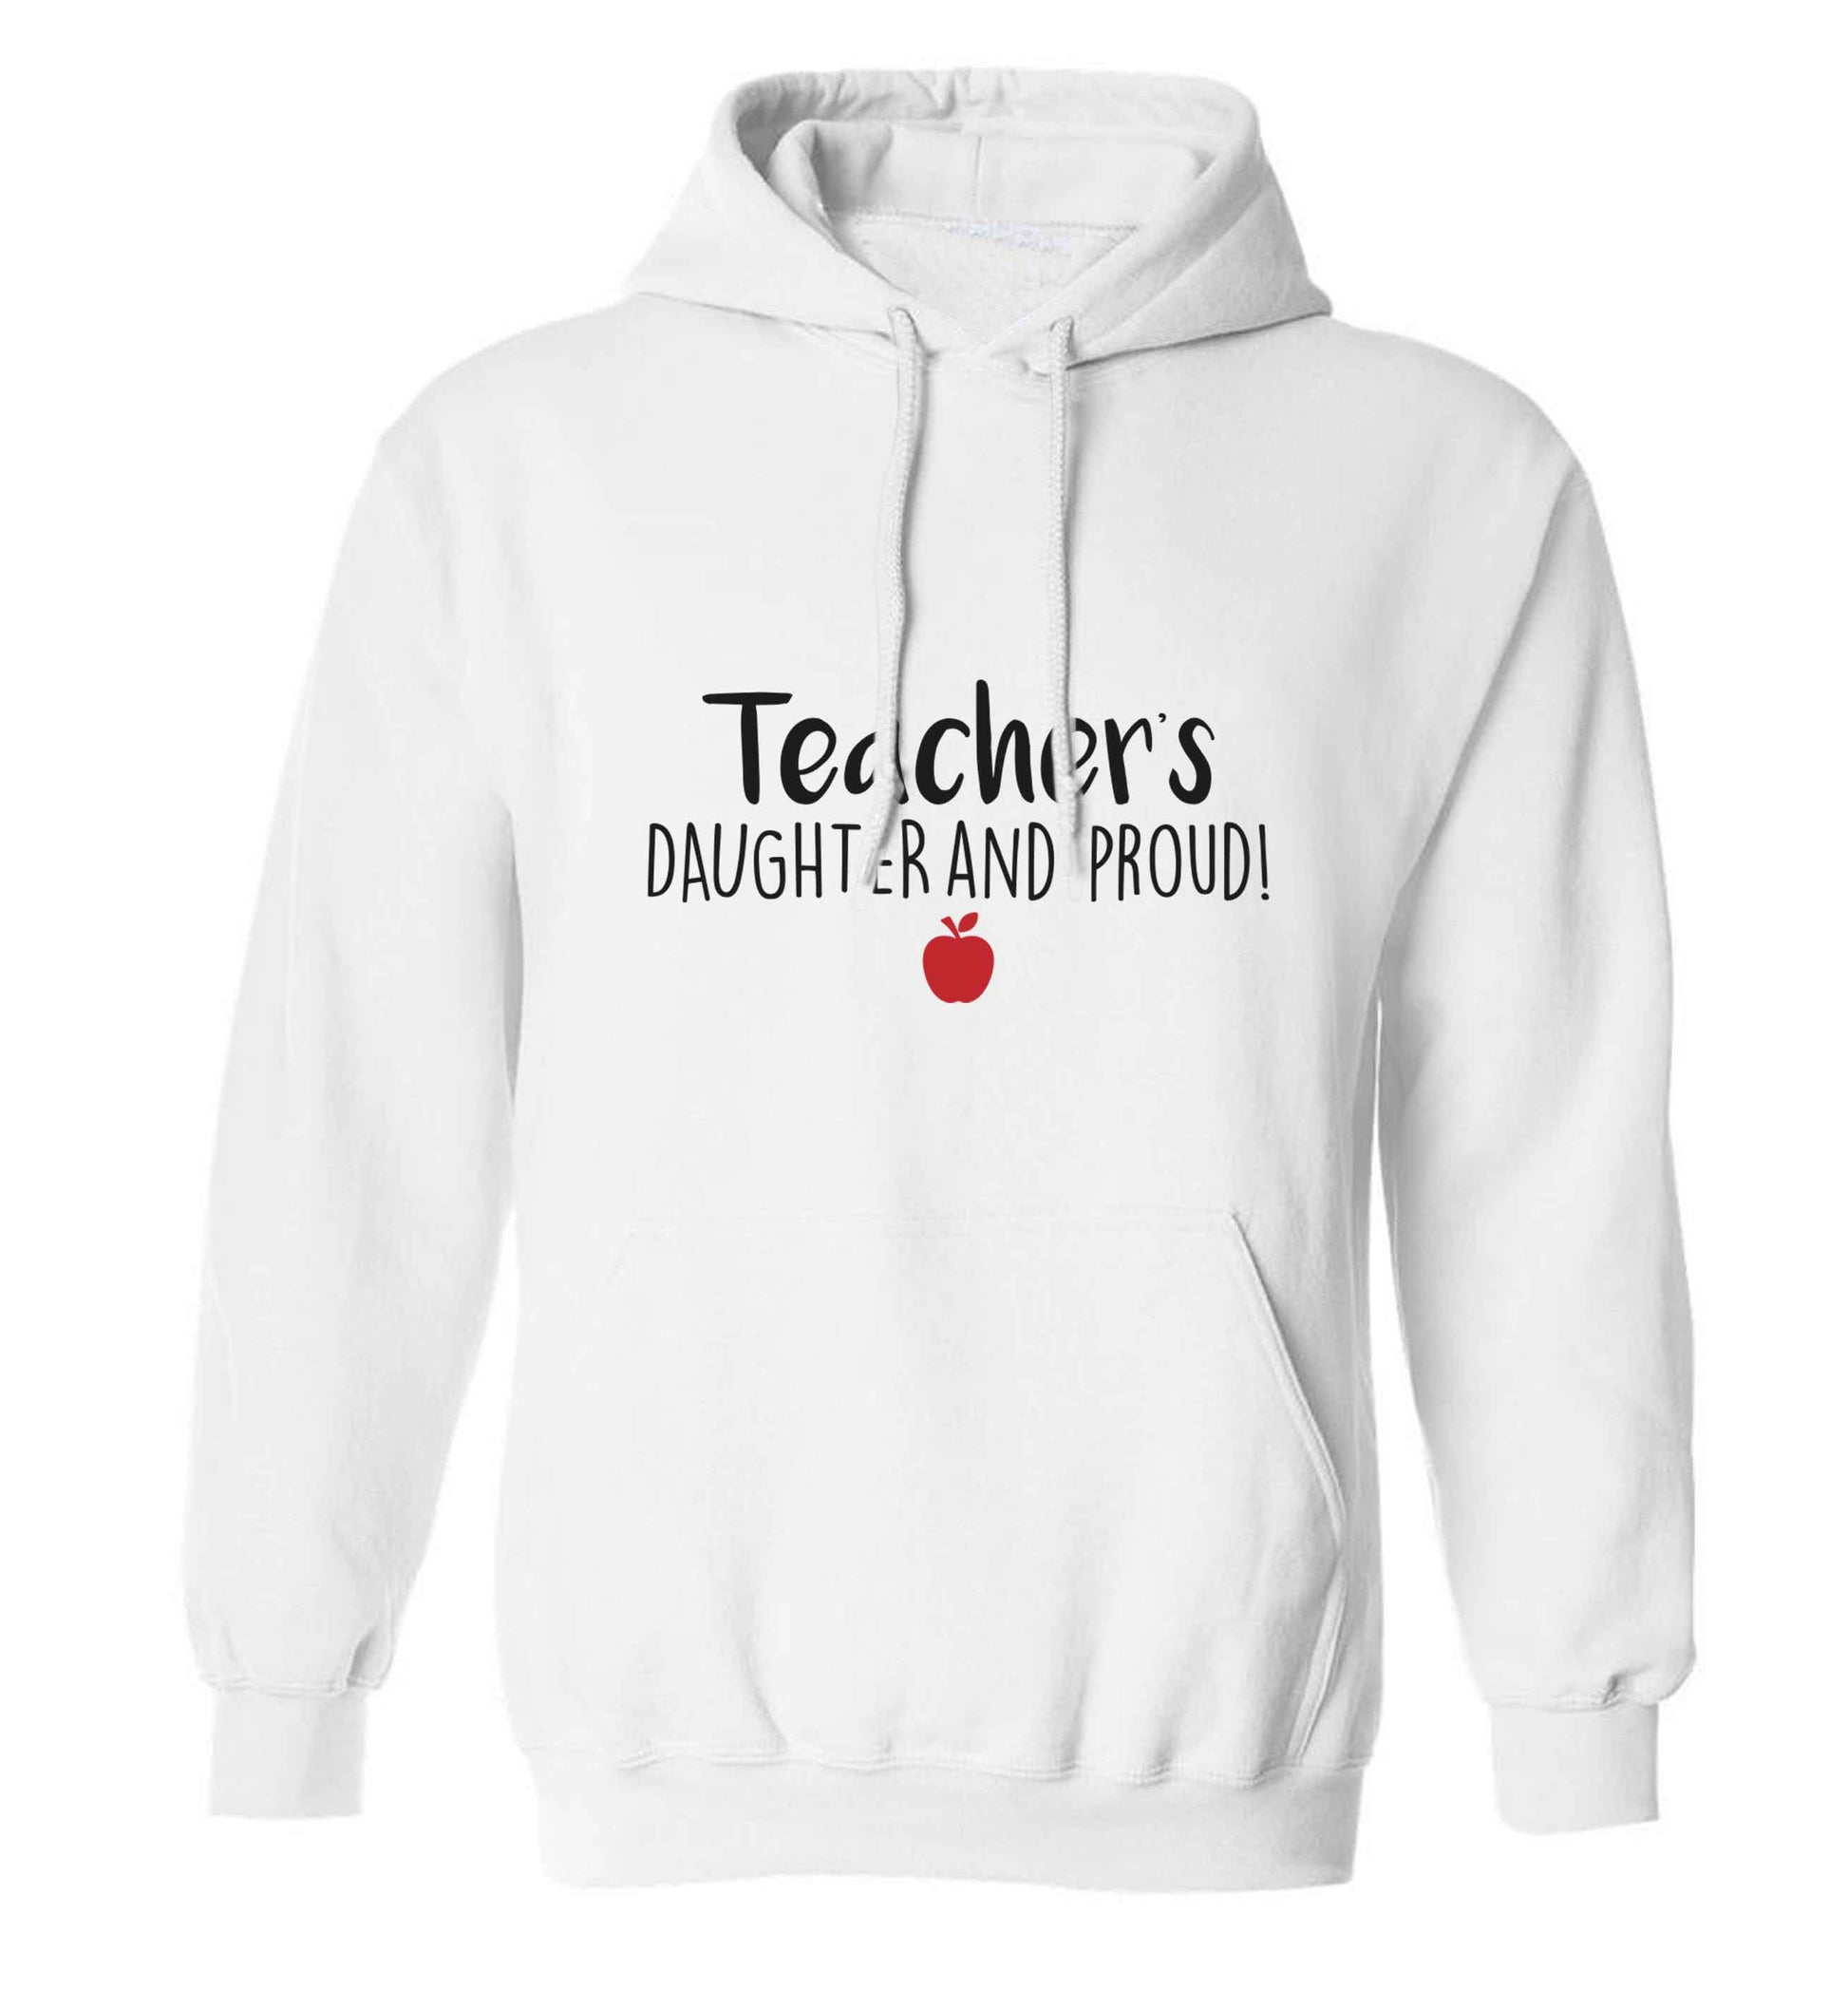 Teachers daughter and proud adults unisex white hoodie 2XL